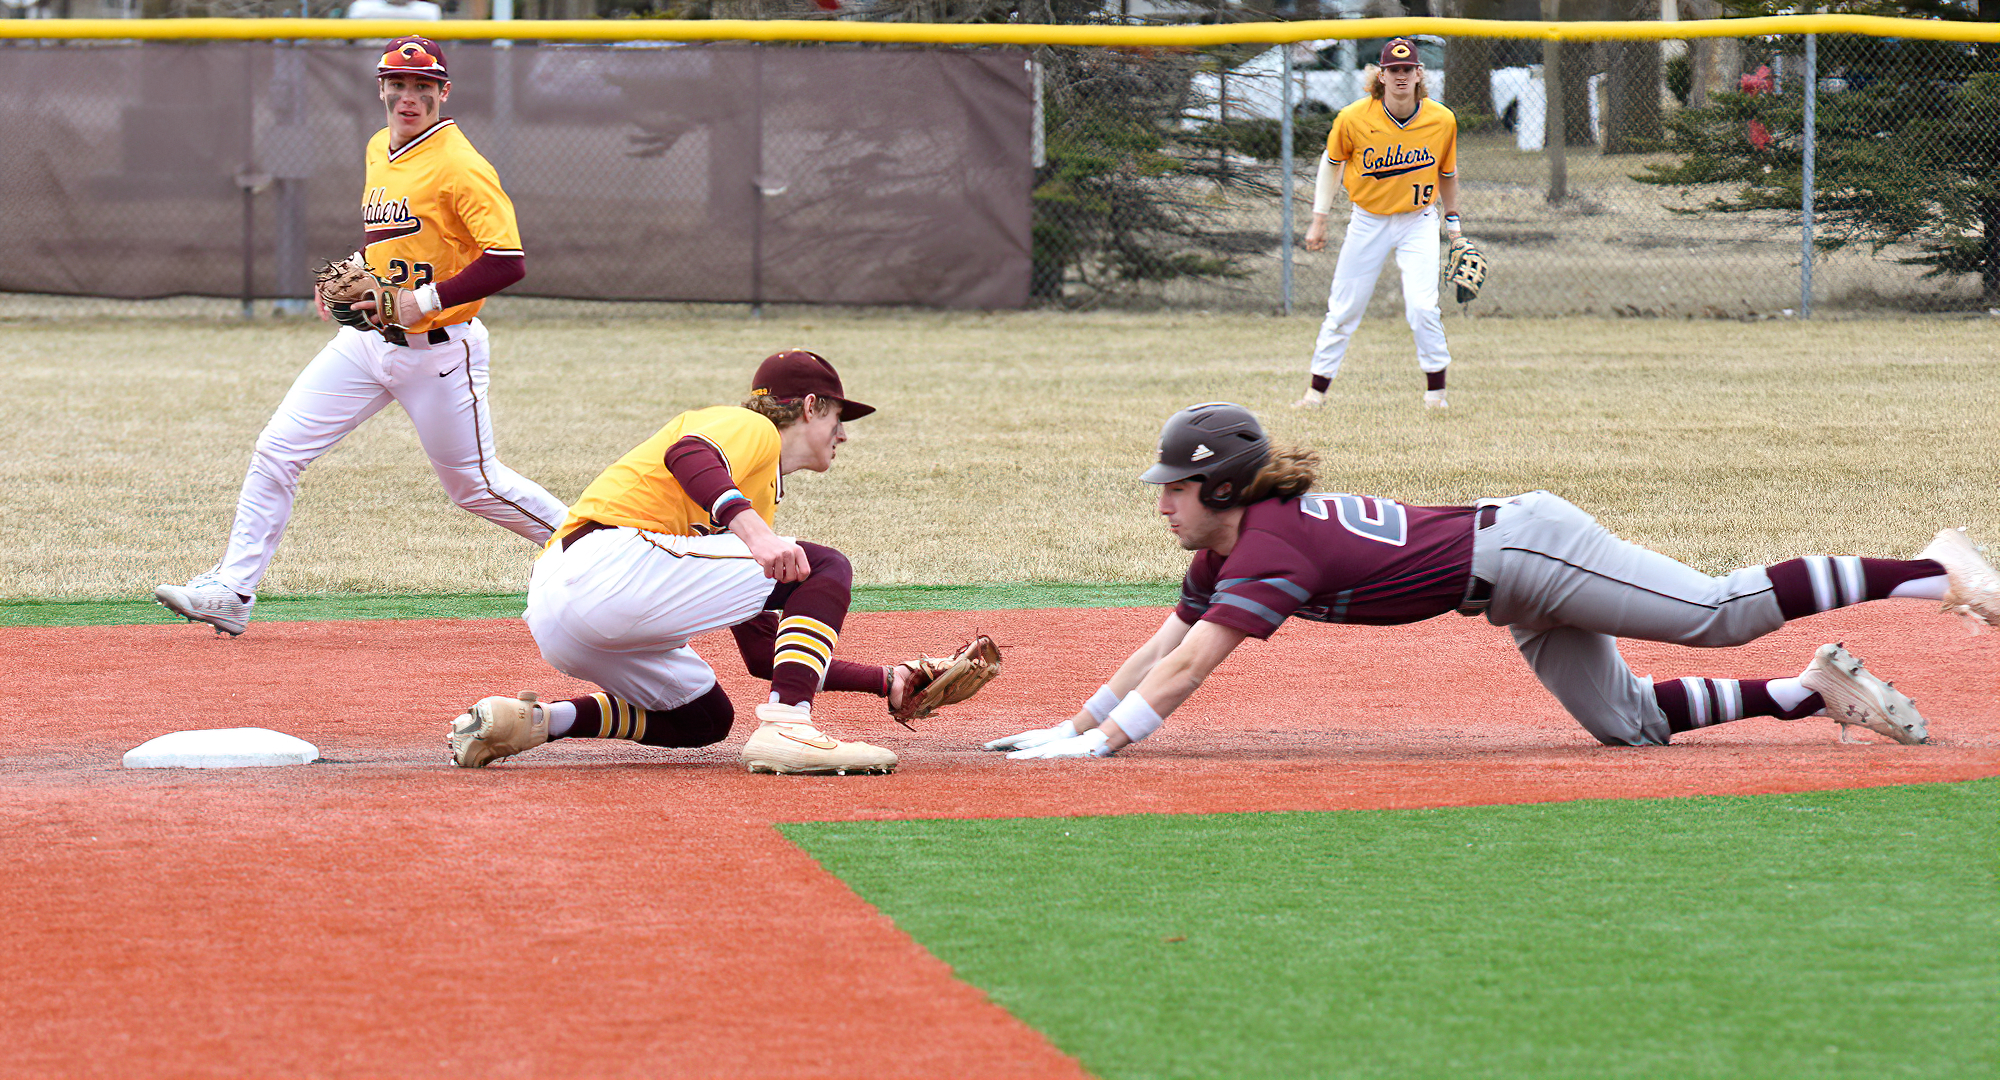 Cobber shortstop Thomas Horan waits to apply the tag to a would-be base stealer during the Cobbers' doubleheader with Augsburg.